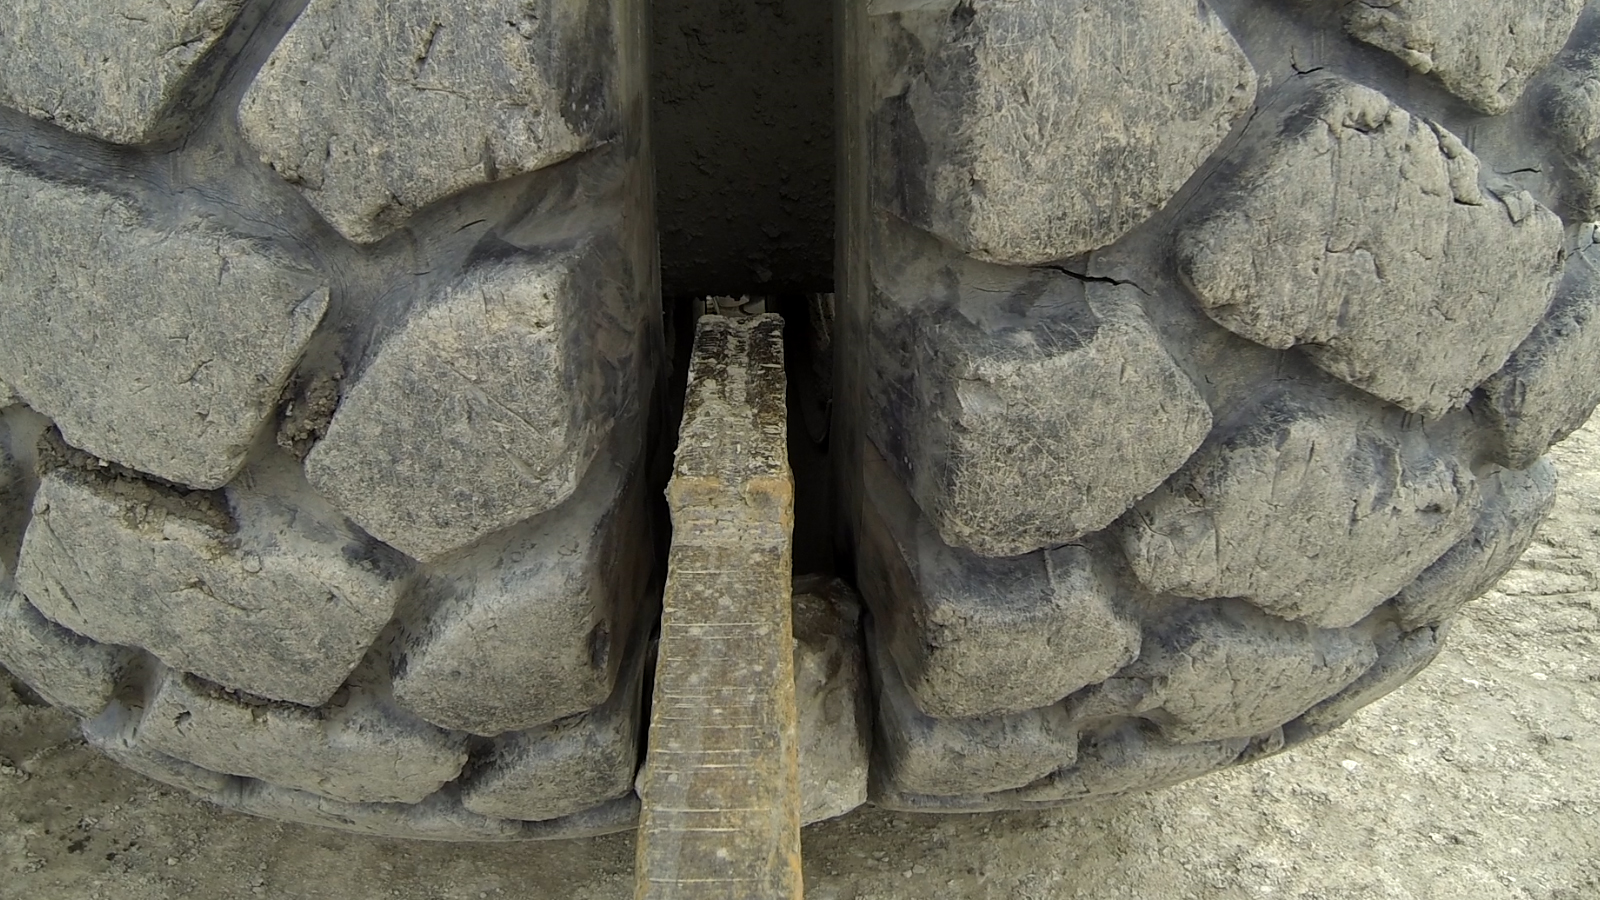 TITLE 201903  STONE BETWEEN TRUCK’S DUAL TYRES BECAME